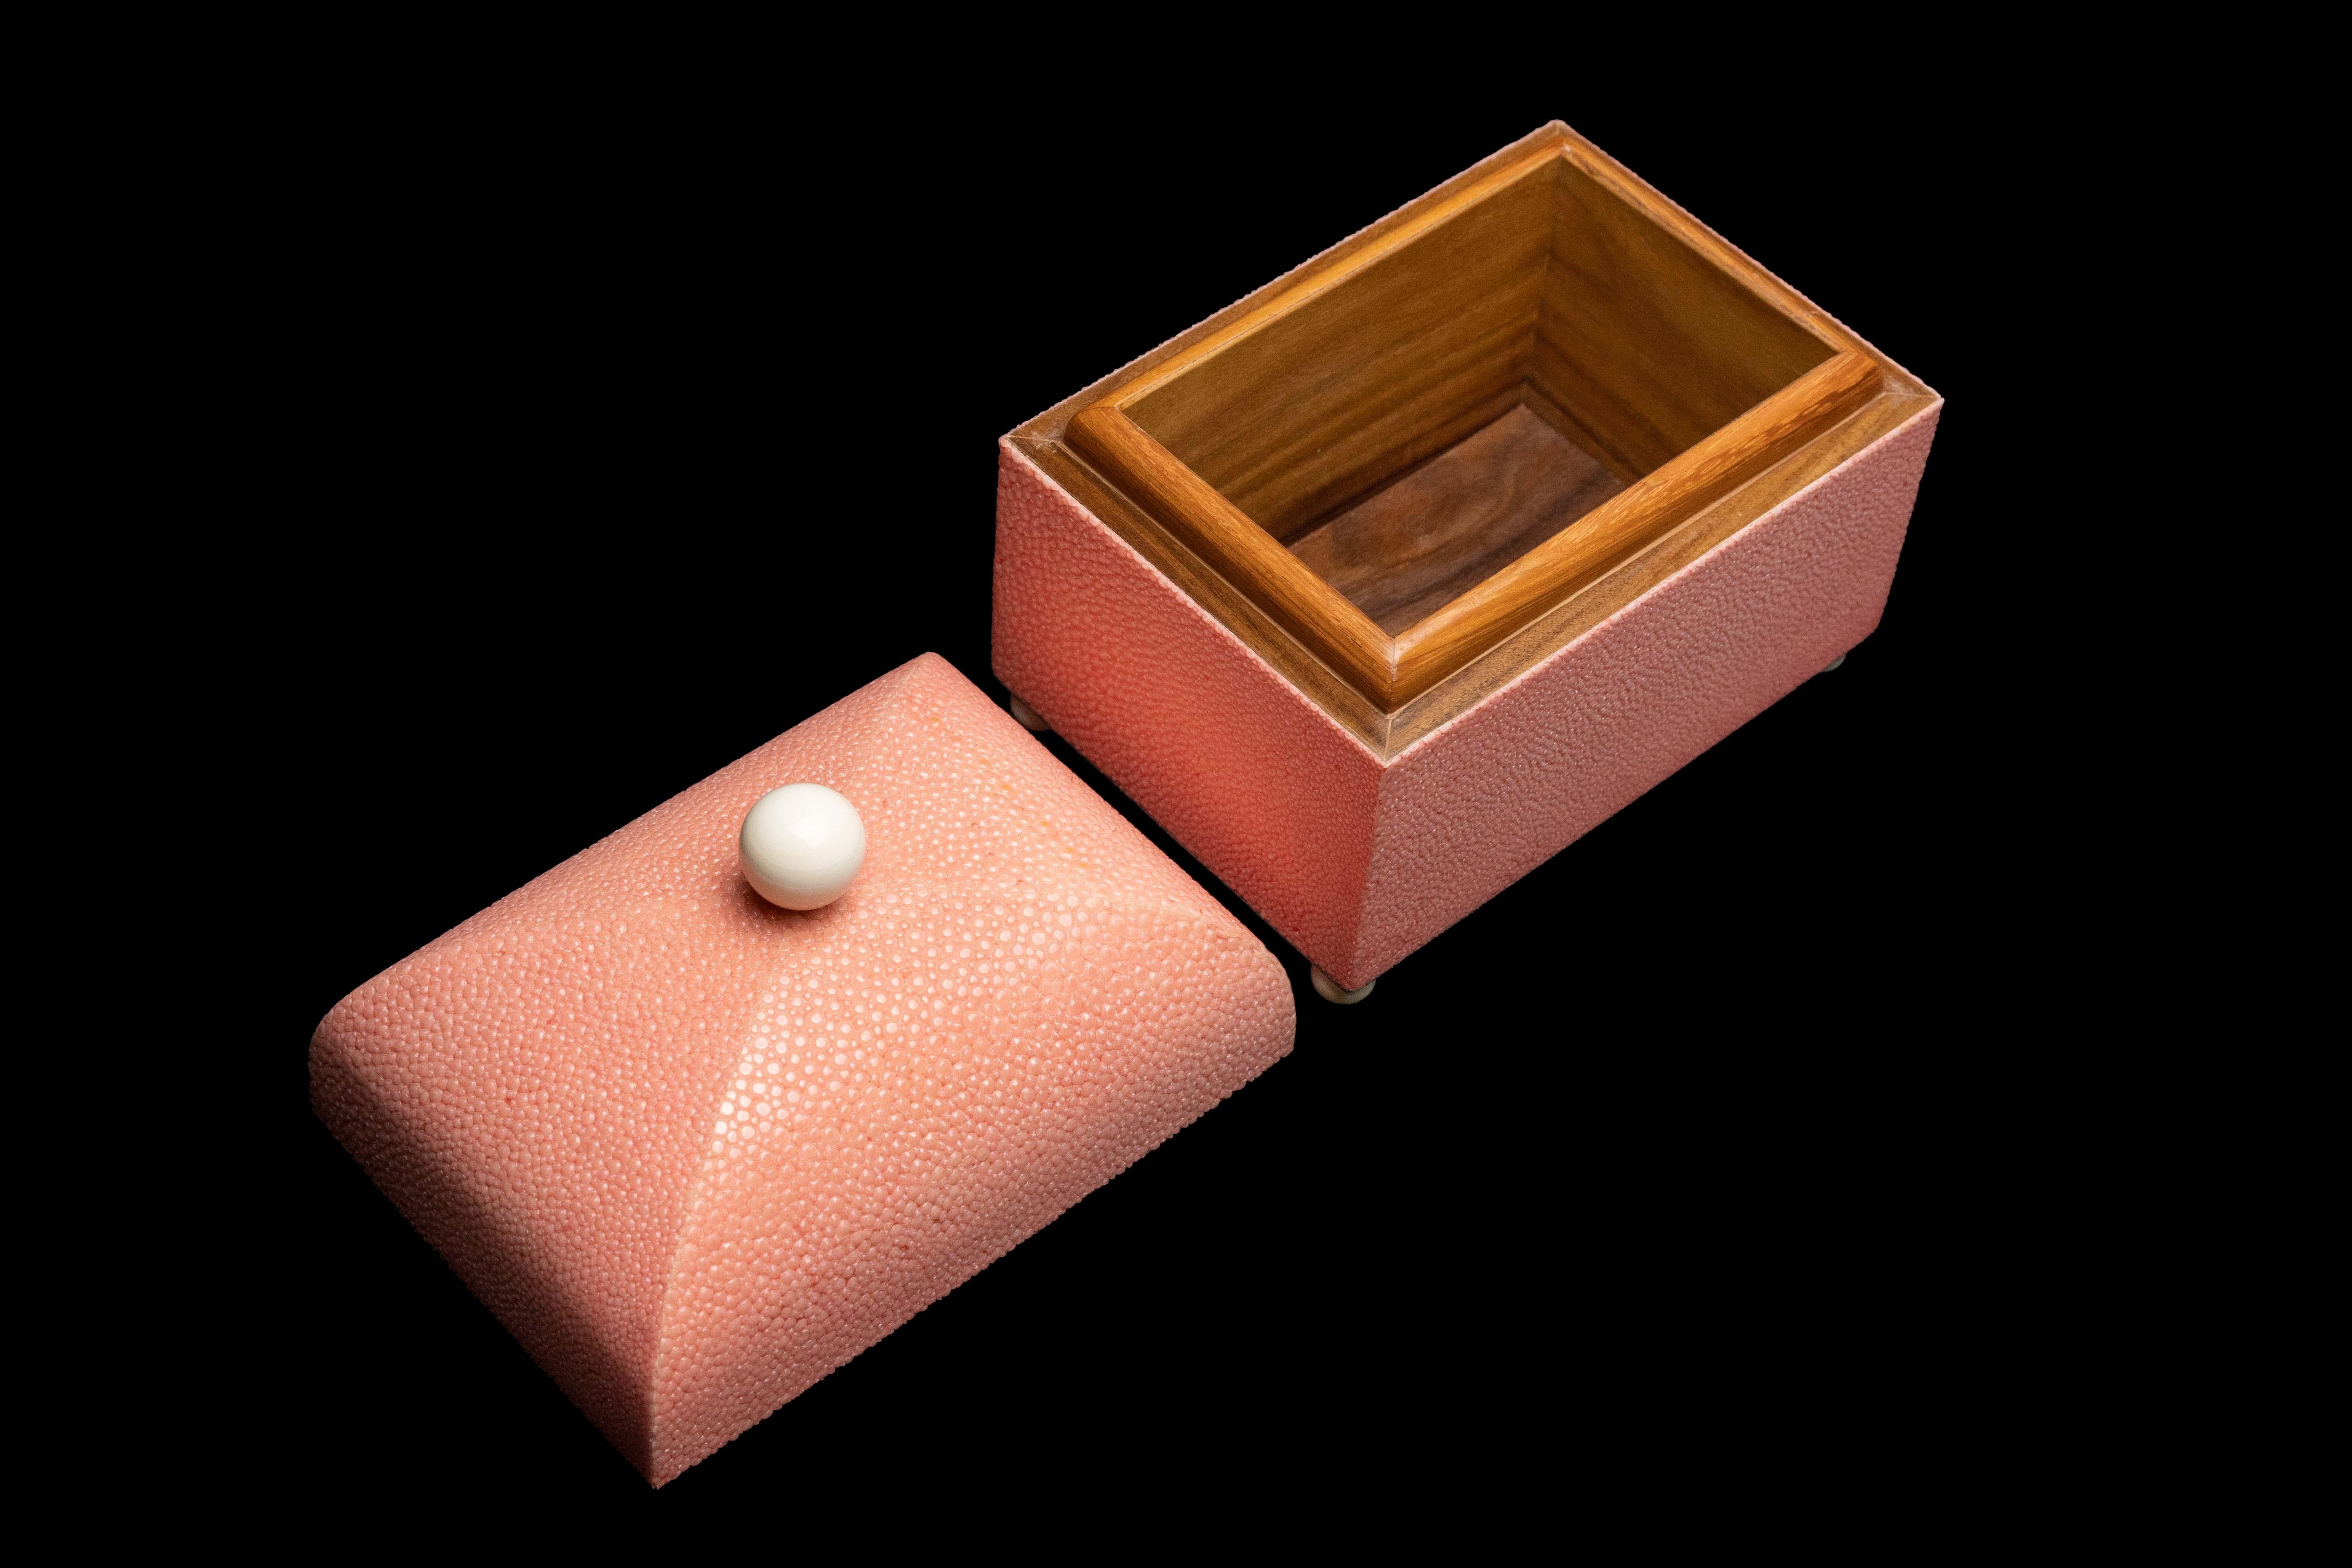 Pink shagreen box w/ bone top and feet:

Measures Approximately: 5.5